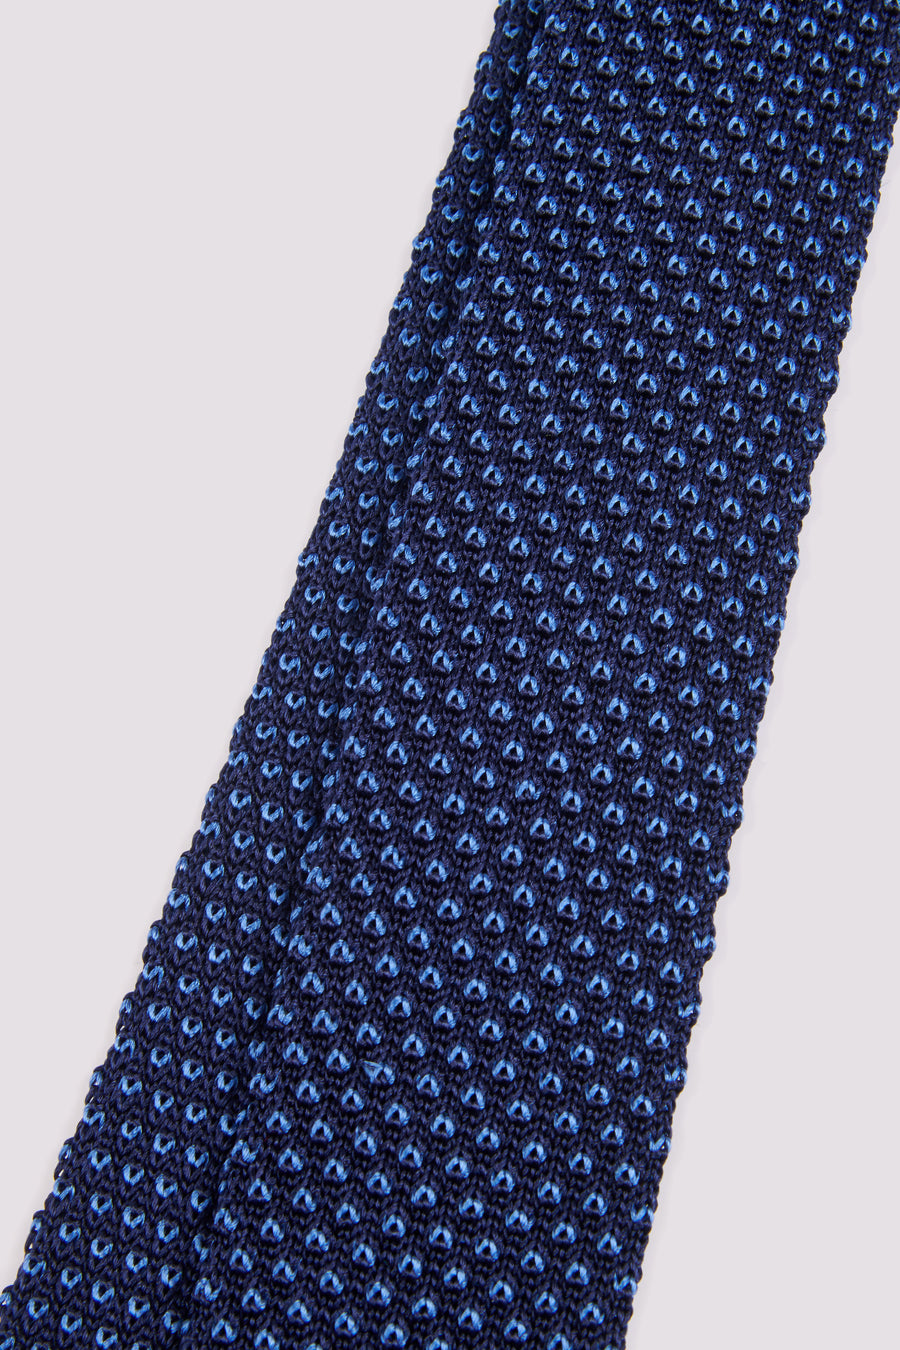 100% Silk Knitted Tie in French Navy